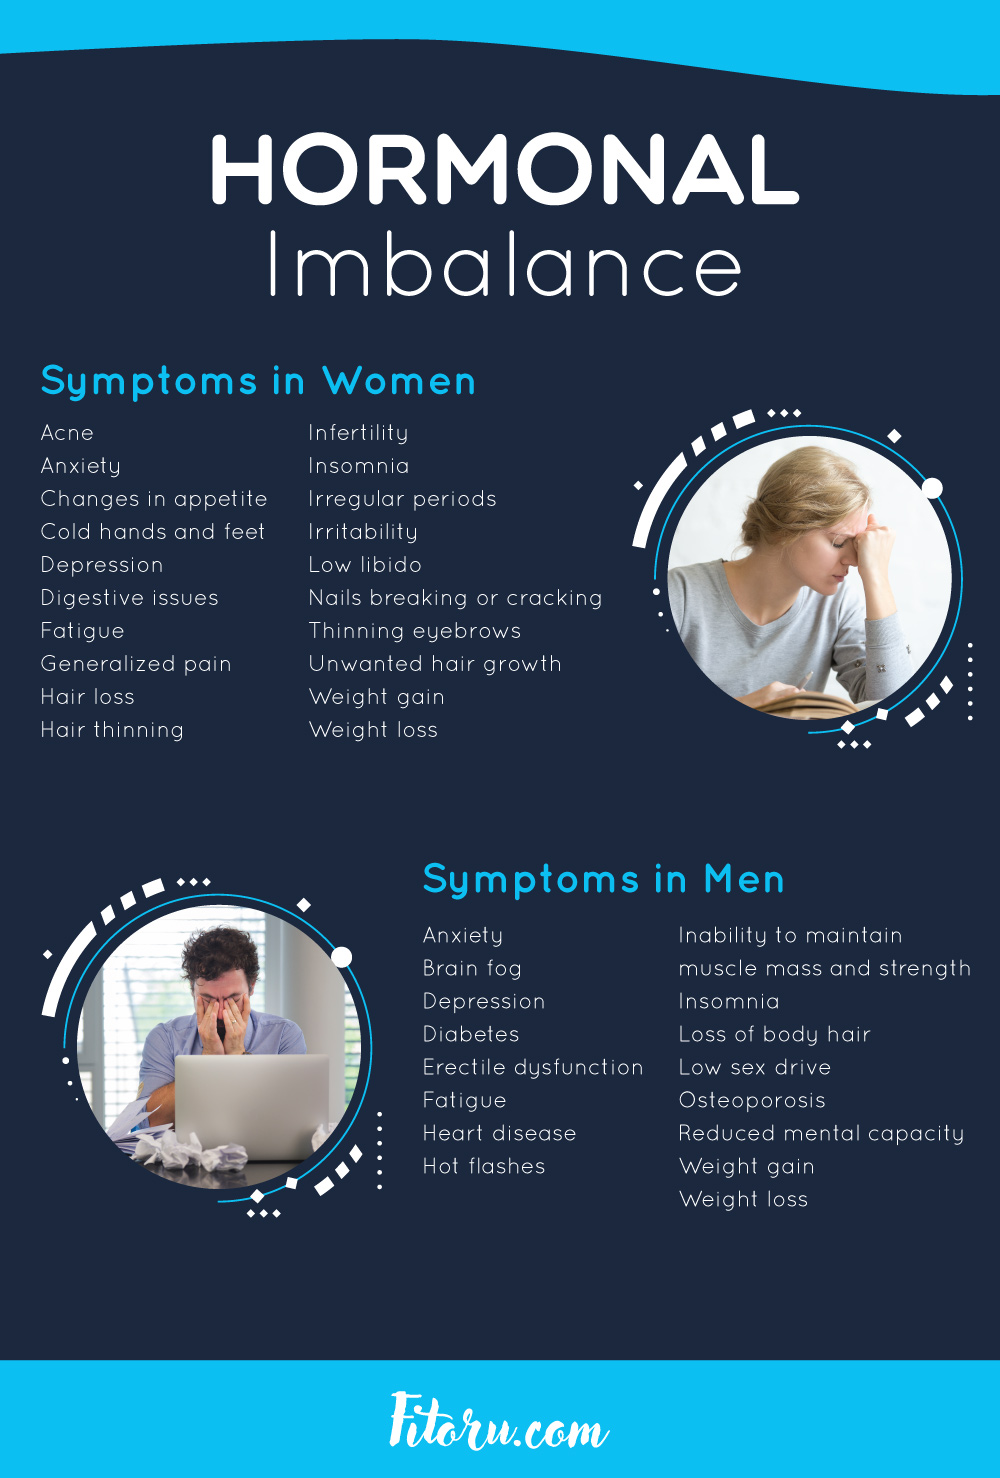 Here are the symptoms of hormonal imbalance.